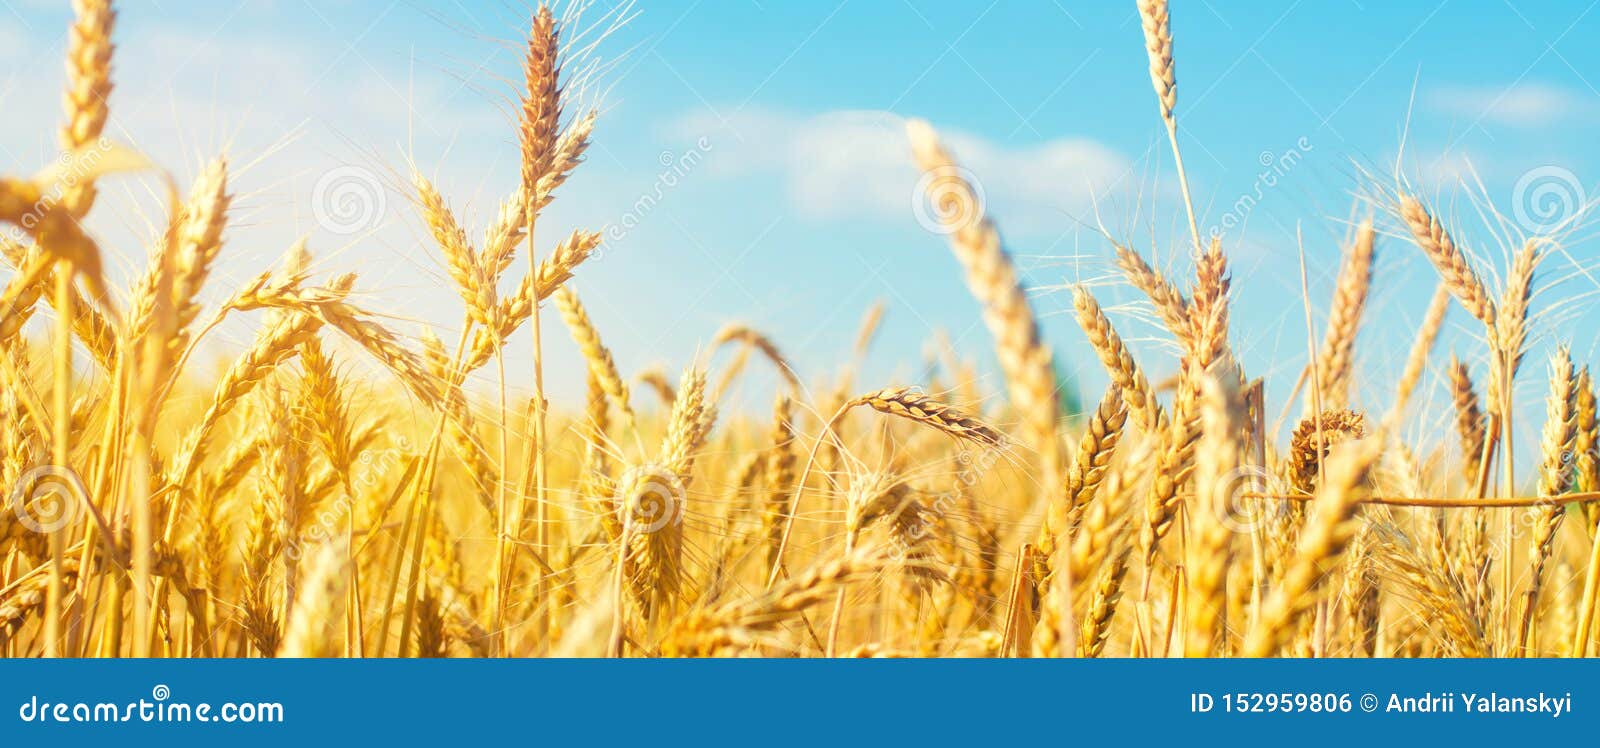 beautiful view of the wheat field and blue sky in the countryside. cultivation of crops. agriculture and farming. agro industry.